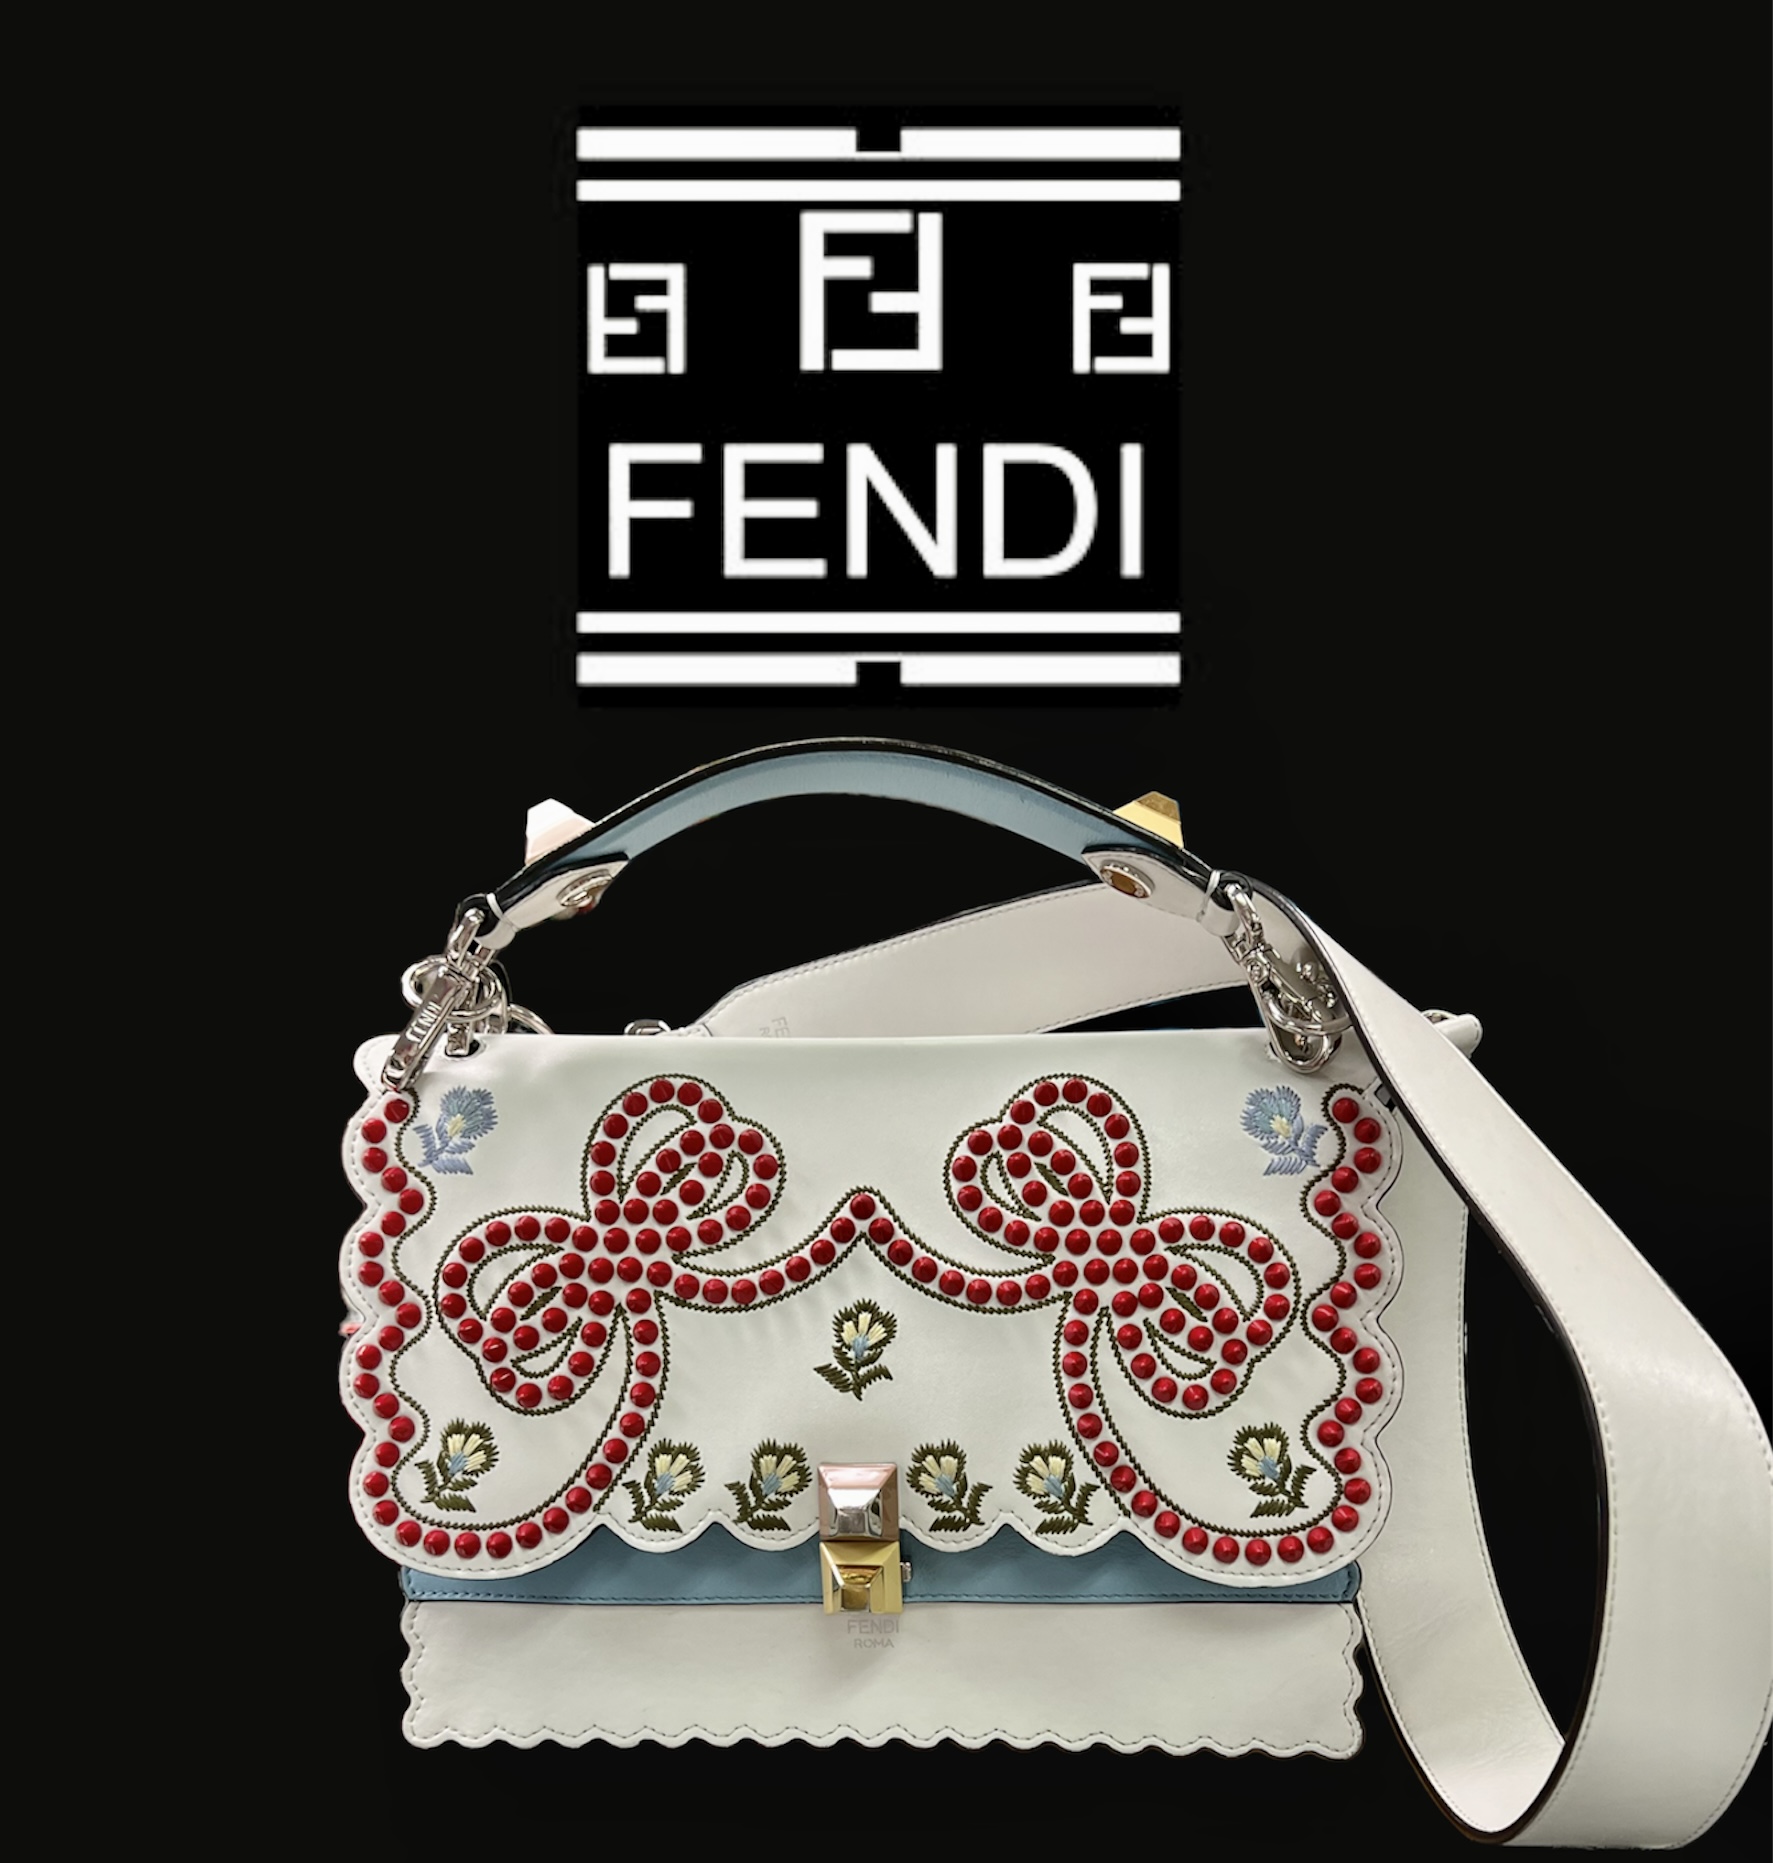 Fendi Kan I Handbag Embroidered Studded Leather Medium Handbag
This authentic Fendi Kan I Handbag Embroidered Studded Leather Medium is a uniquely designed bag perfect for the stylish fashionista. Crafted from white leather, this bag features contrasting studs in the characteristic bow design, embroidered flower details, leather top handle, detachable leather strap, double stud two-tone plexiglass twist-lock closure and silver and gold-tone hardware accents. Its twist-lock closure opens to an off white microfiber-lined interior divided into two compartments and with a slip pocket perfect for storing your bare essential. Its detachable strap allows this bag to be worn longer on the body for added versatility.
******Estimated Retail Price: $3,550*******
Condition: Very good. A-/B+ Wear consistent with age and use.  Slight curling on front, creasing on sides, minor wear underneath flap, and in interior. Minimal scratches on hardware.
Accessories: detachable strap and handle.
Measurements: Handle Drop 5\", Height 7.5\", Width 10\", Depth 5\", Strap Drop 18\"
Designer: Fendi
Model: Kan I Handbag Embroidered Studded Leather Medium
COMES WITH CERTIFICATE OF AUTHENTICITY